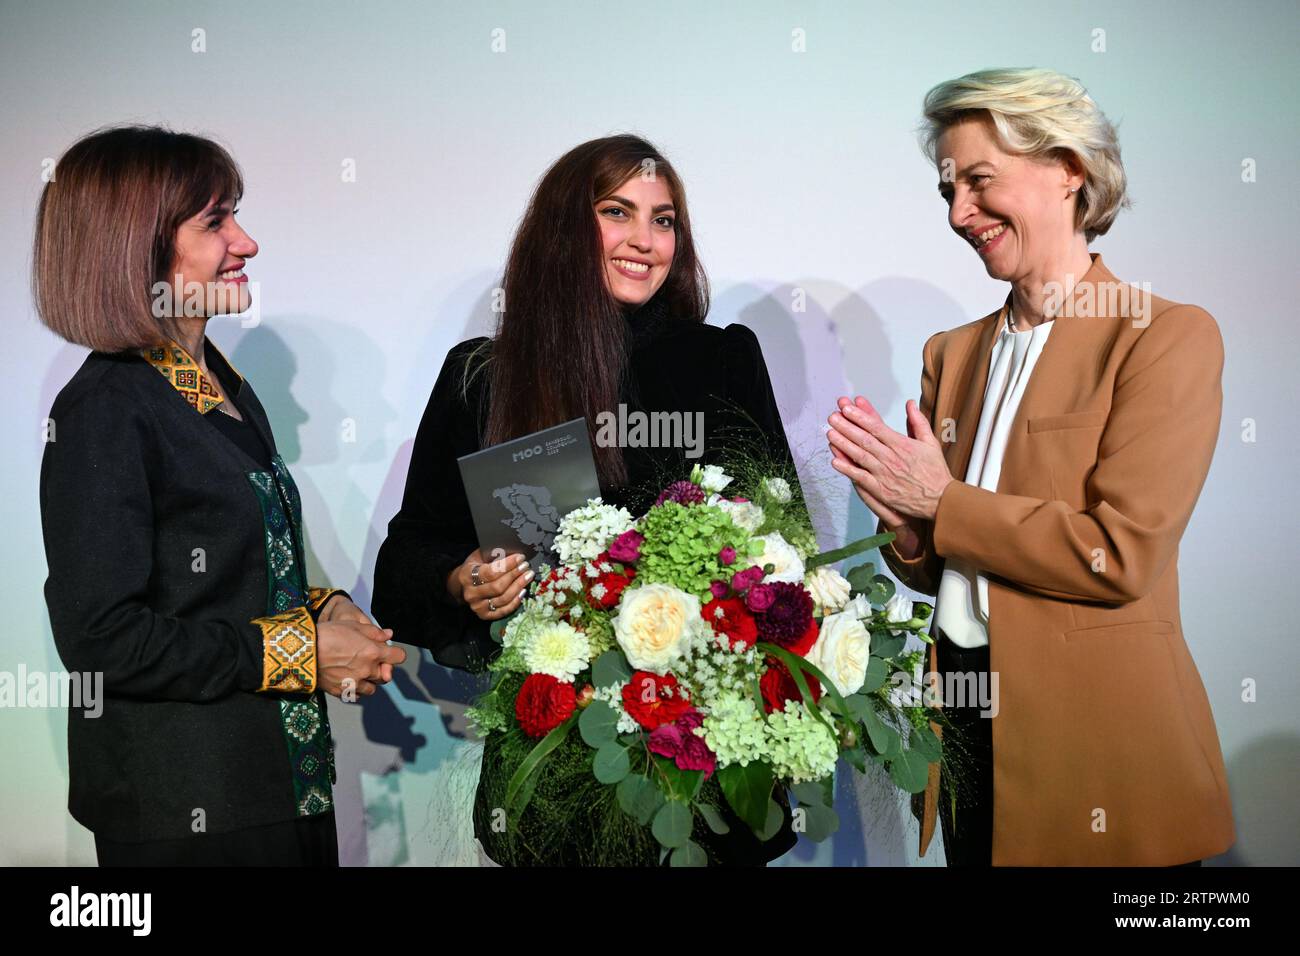 Potsdam, Germany. 14th Sep, 2023. Mersedeh Shahinkar (l), Iranian activist, and Shima Babaei (m), Iranian women's rights activist, are happy about the award after receiving the M100 Media Award next to Ursula von der Leyen (r), President of the European Commission. The Iranians accept the award on behalf of the Iranian 'Women, Life, Freedom' movement. The M100 Media Award has been presented since 2005 as part of the international media conference M100 Sanssouci Colloquium. Credit: Soeren Stache/dpa/Alamy Live News Stock Photo